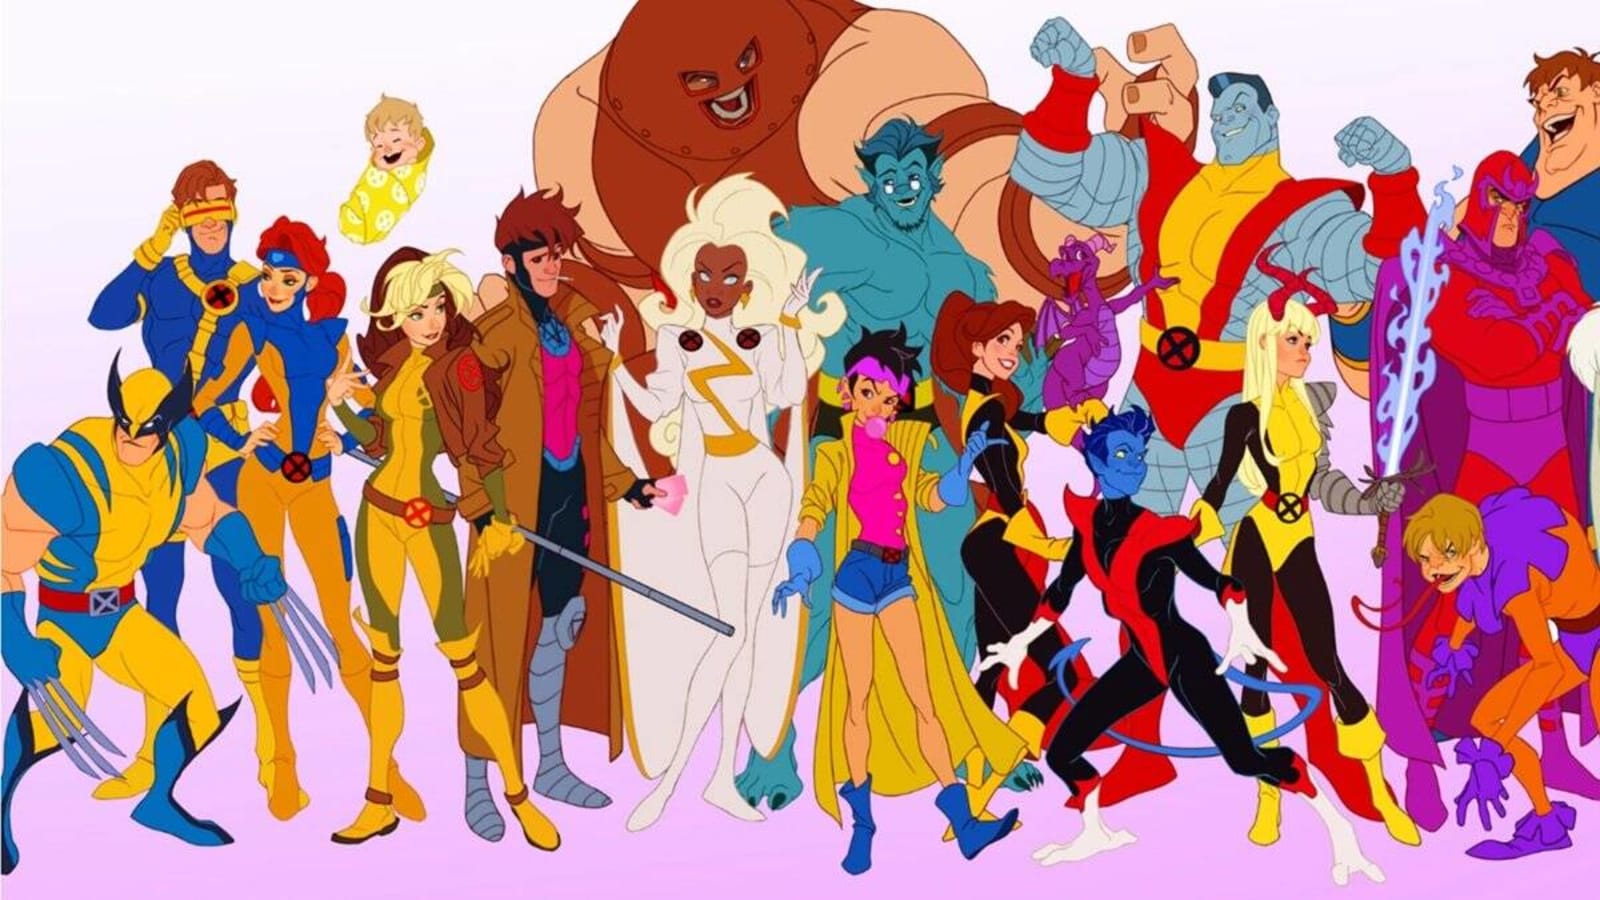 X-MEN in the Style of Classic Disney Animation Makes Marvel’s Mutants Magical